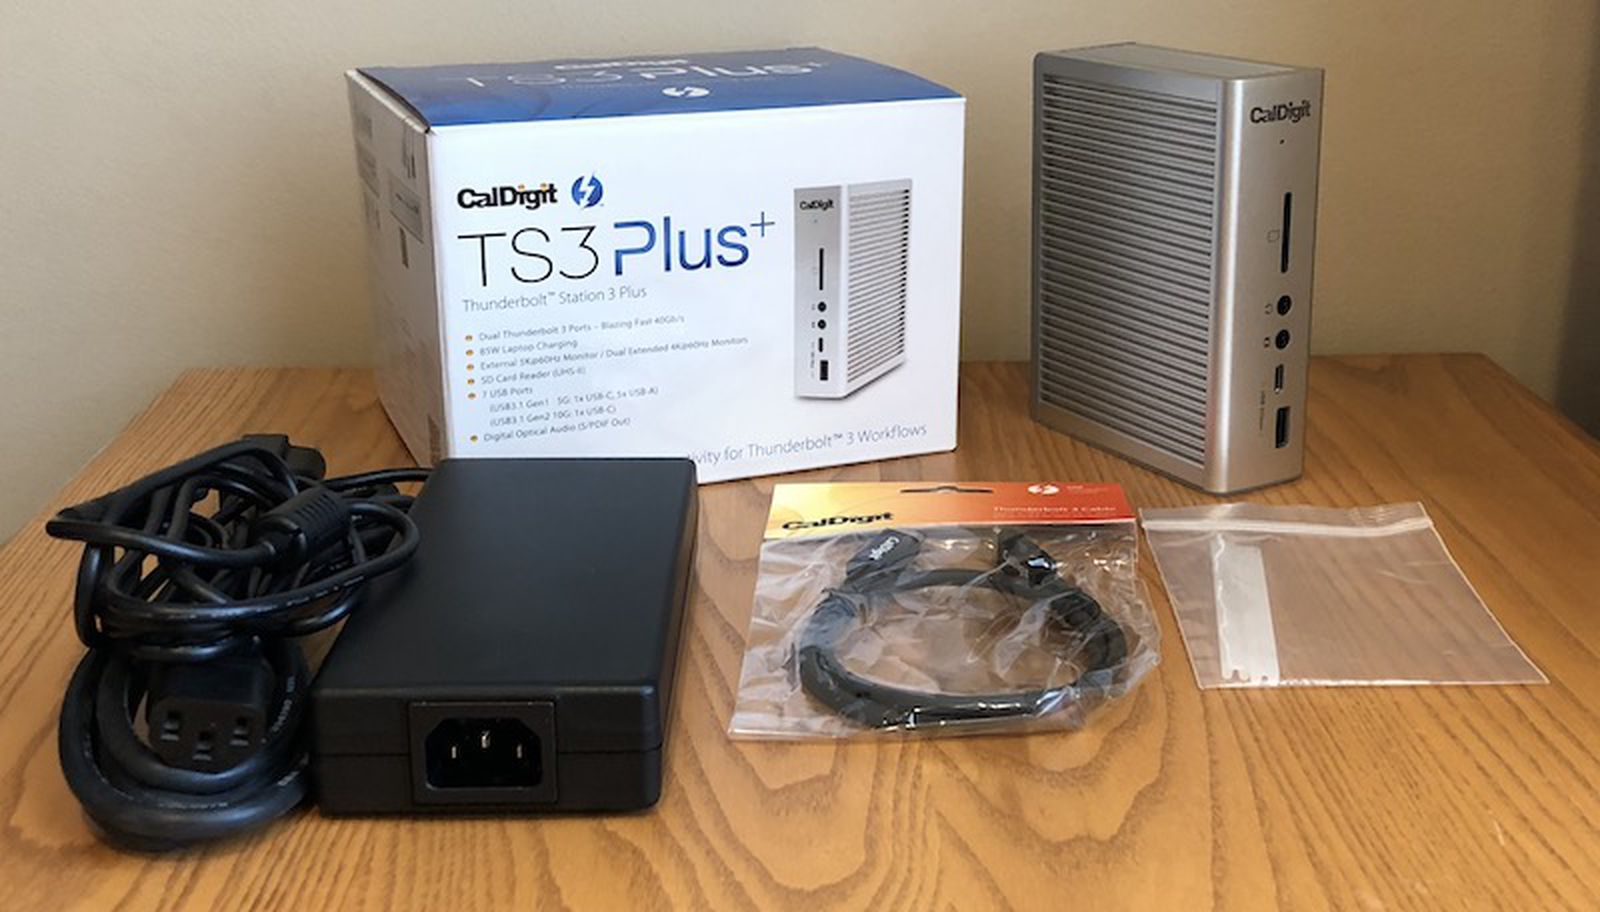 Review: CalDigit's 'TS3 Plus' Dock Gives You 15 Ports, 85W